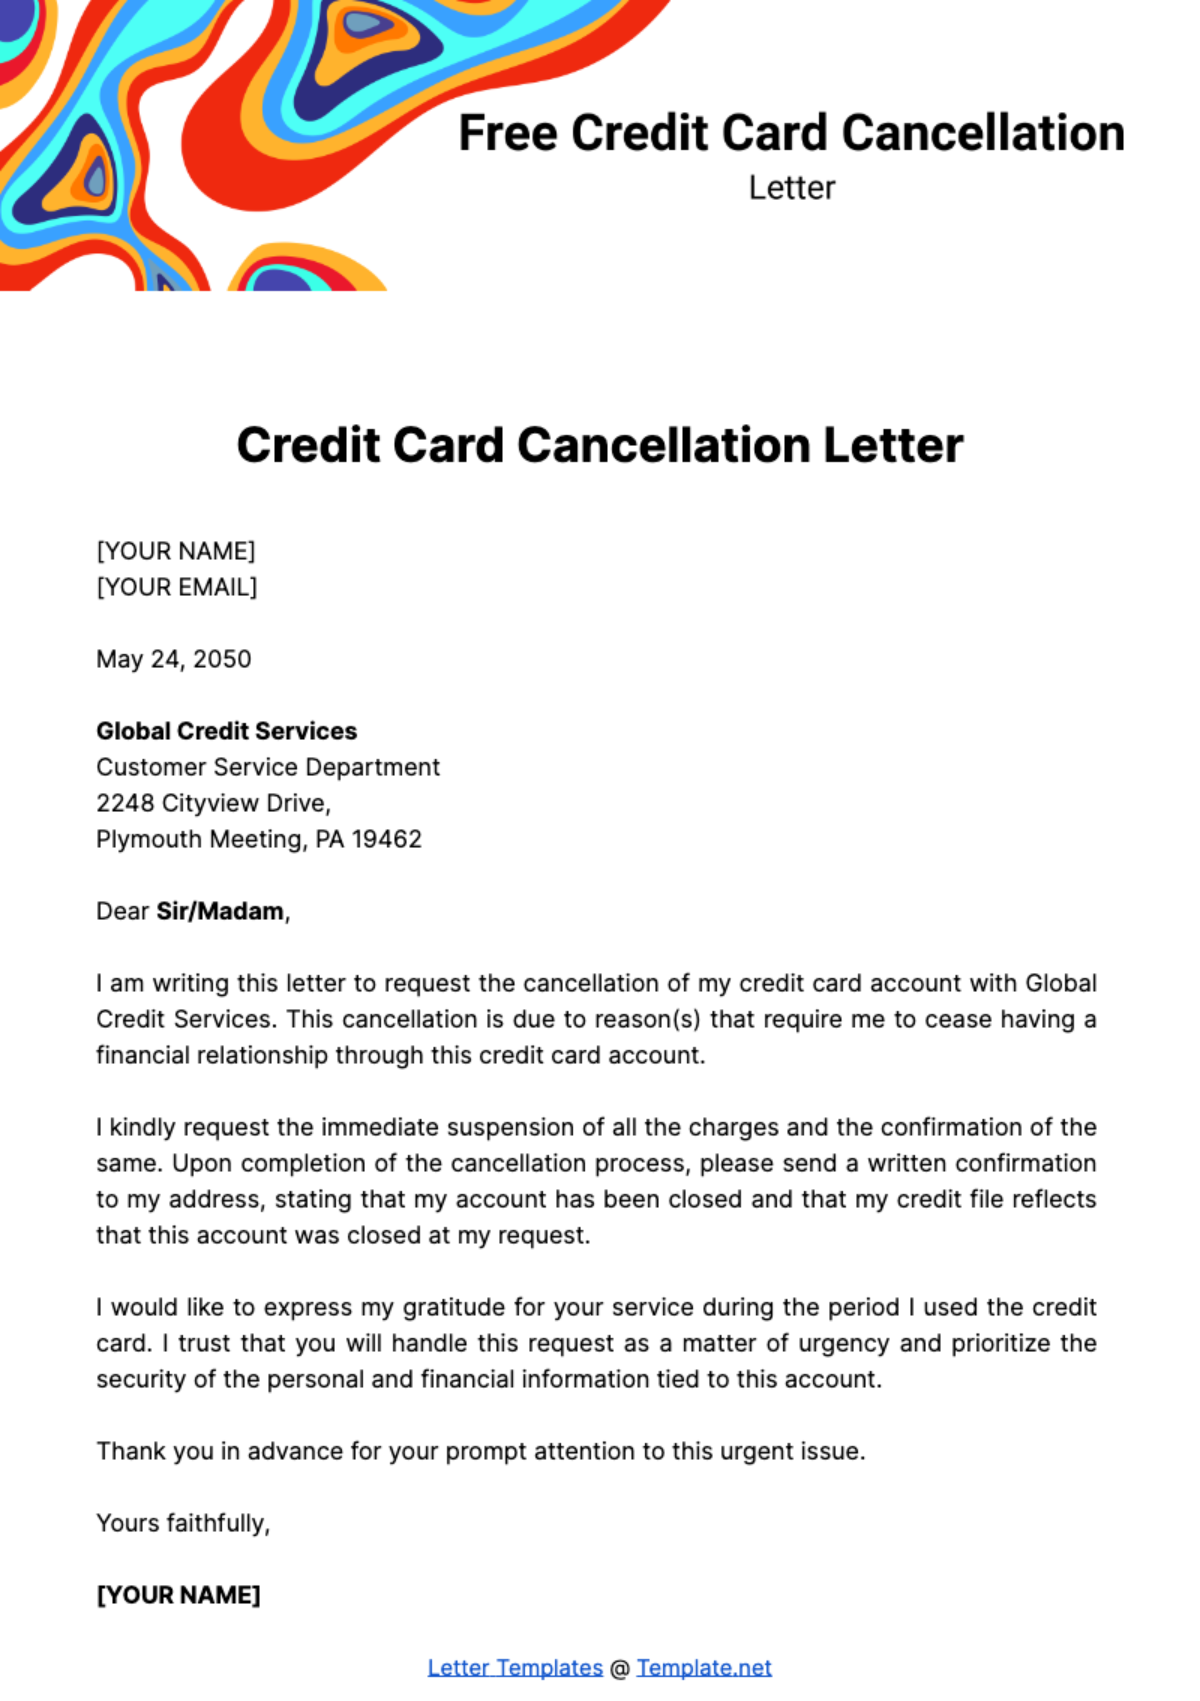 Free Credit Card Cancellation Letter Template